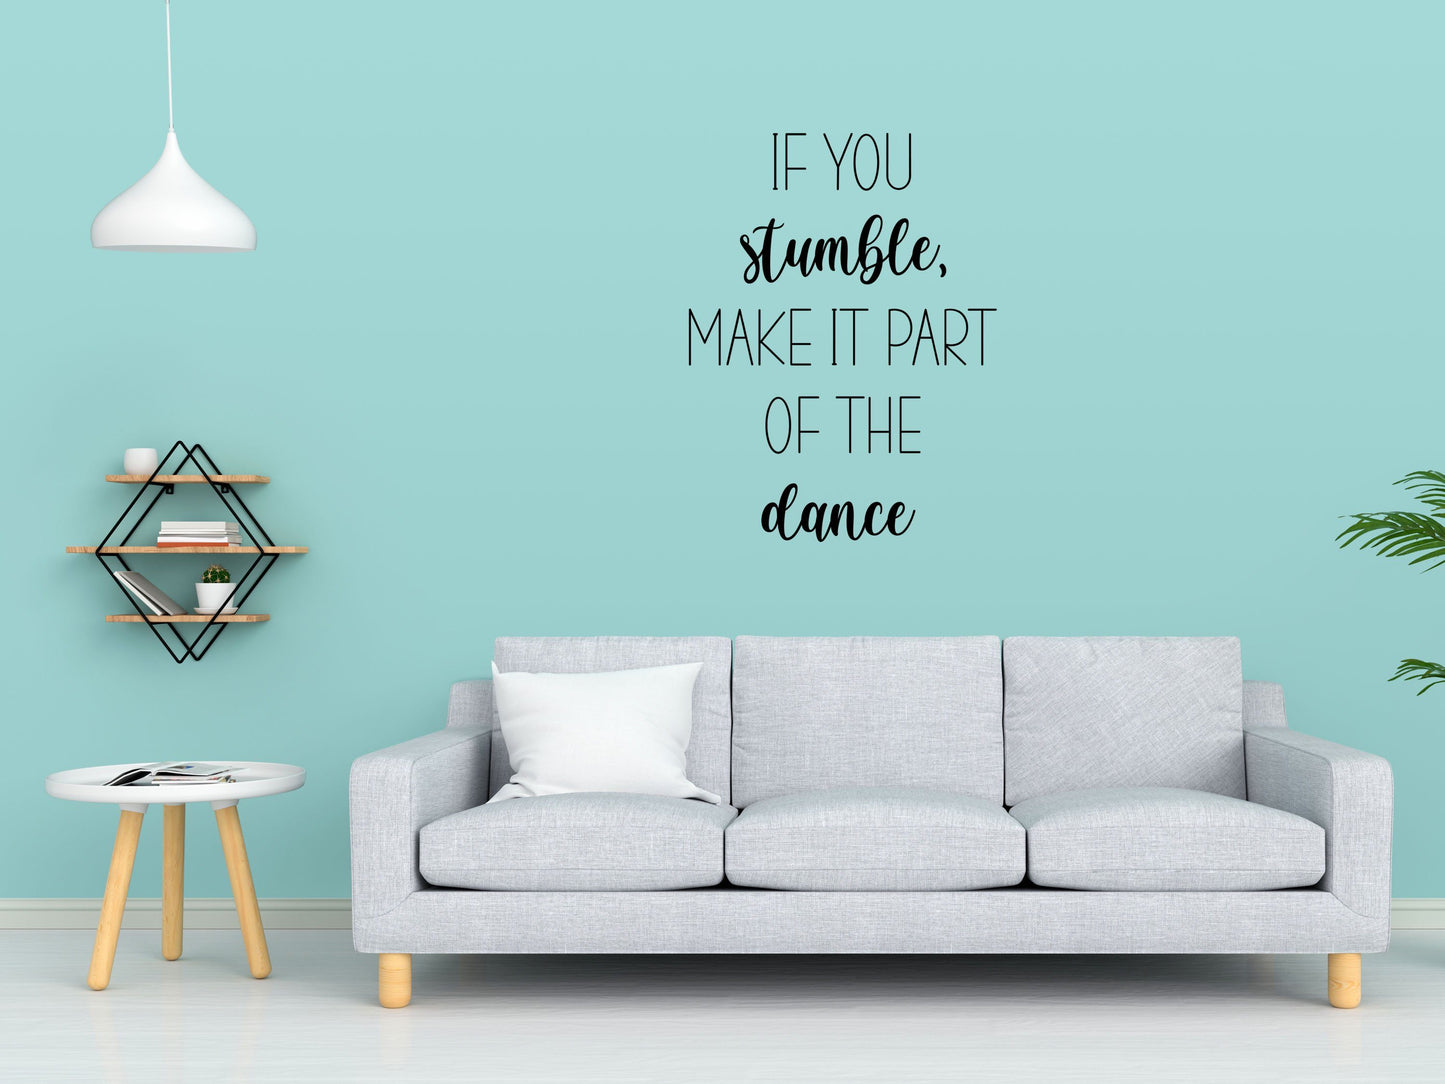 If You Stumble Decal Sticker - Dance Wall Decal - If You Stumble Wall Sign - Motivational Quote Sign - Inspirational Wall Art Vinyl Wall Decal Done 